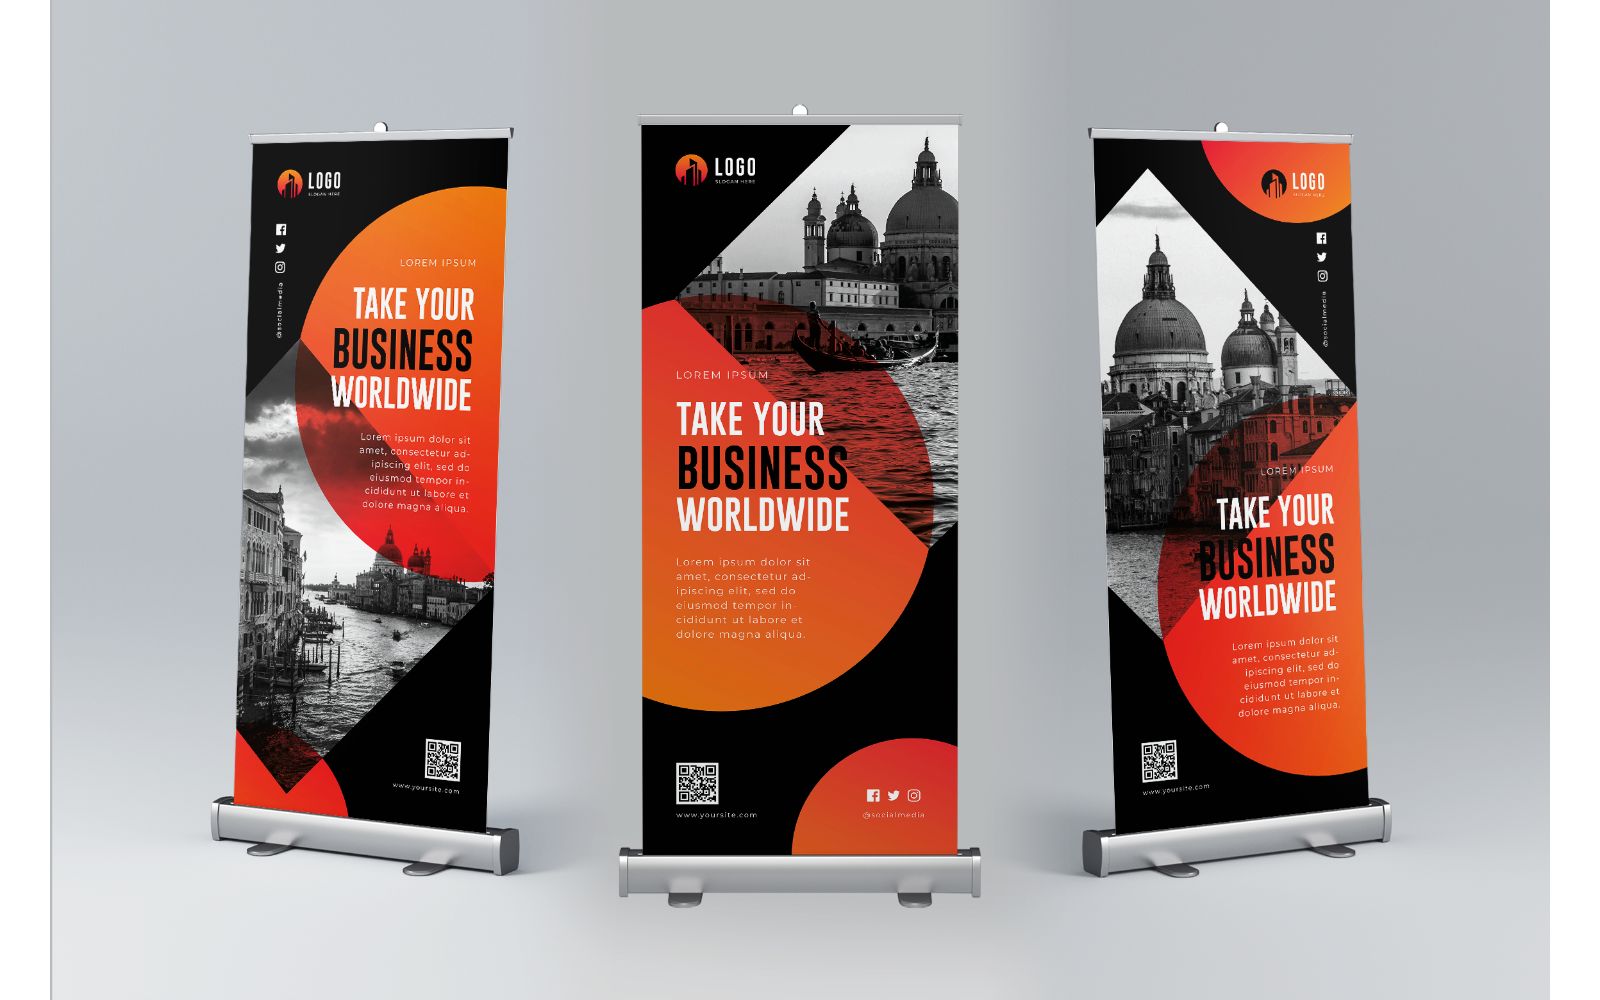 Roll Banner Take Your Business Worldwide - Corporate Identity Template